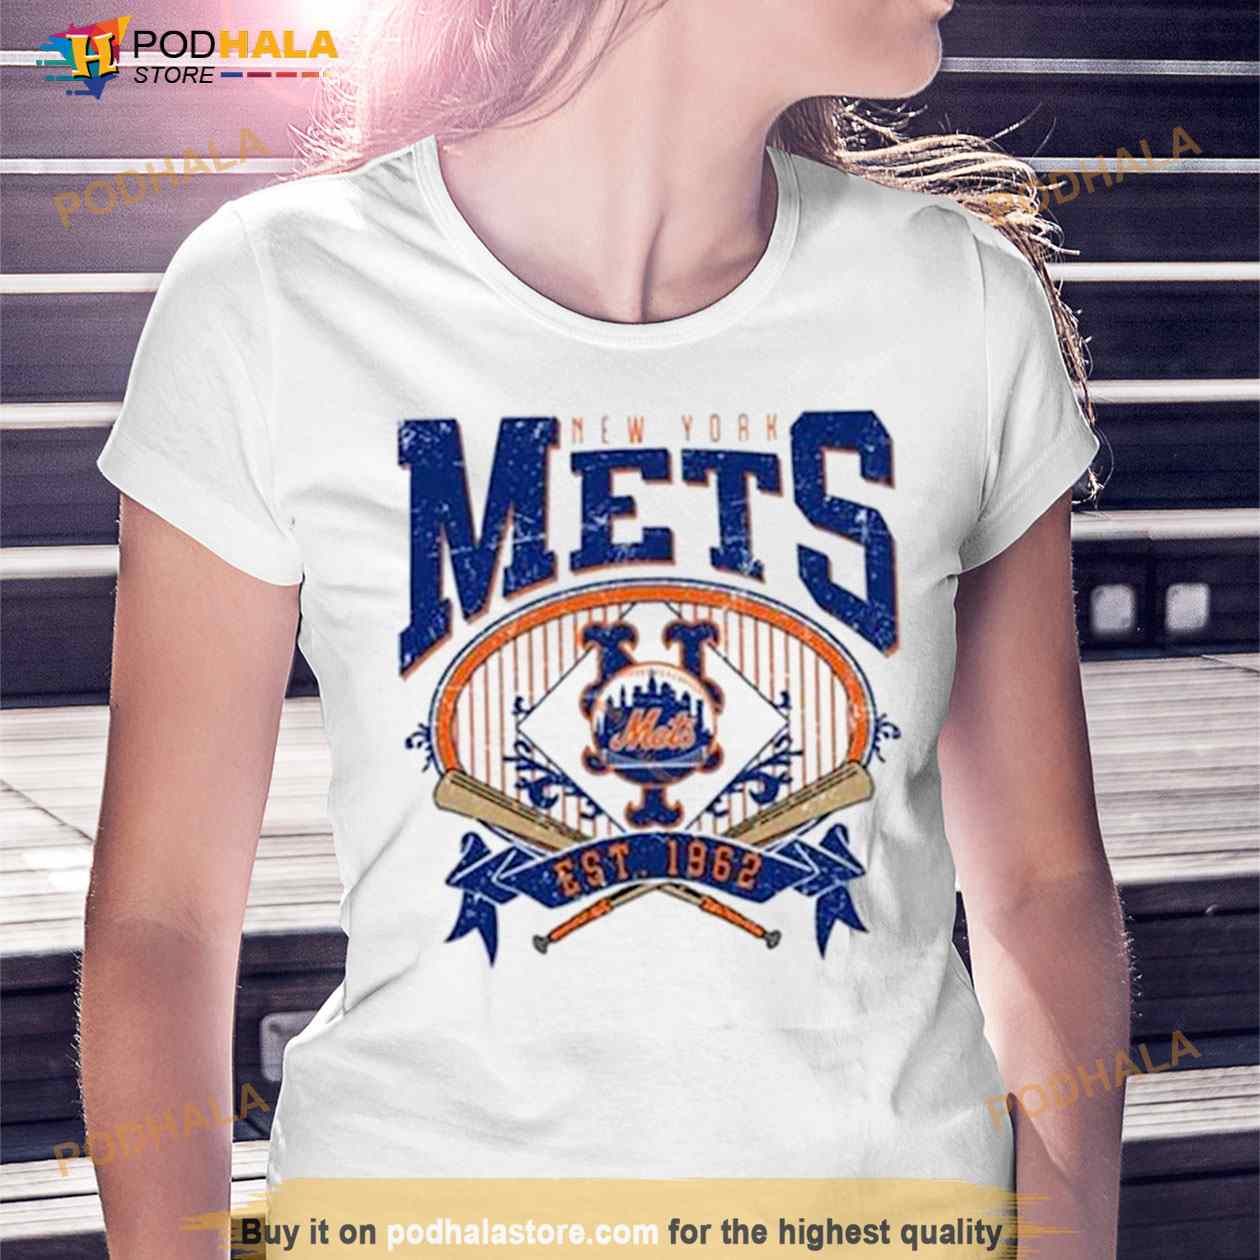 New York Mets 60th anniversary 1962 2022 thank you for the